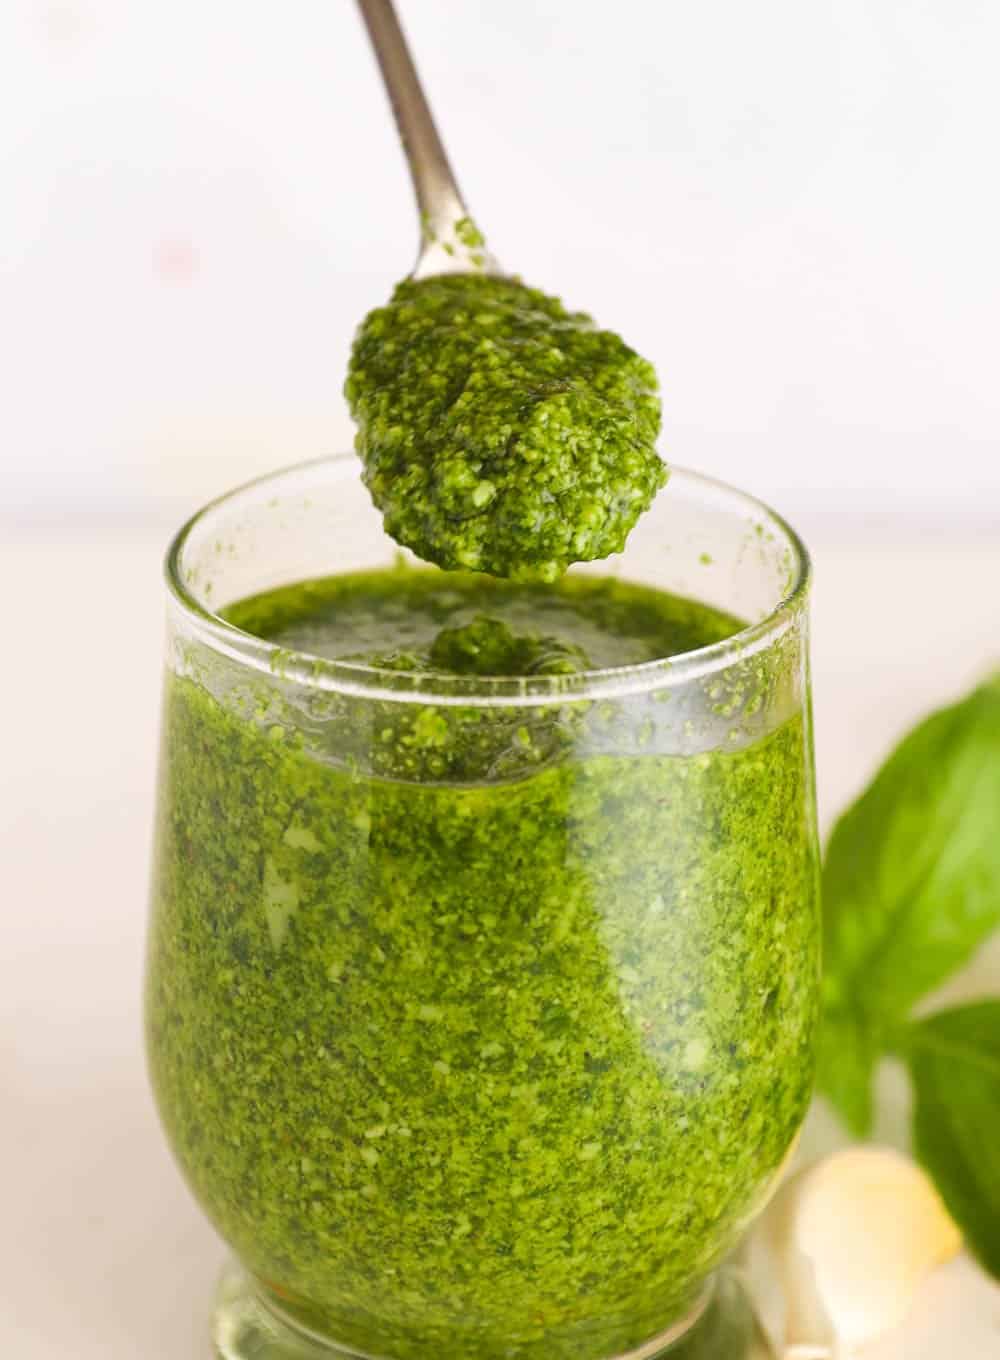 Sauces made from basil are best enjoyed fresh